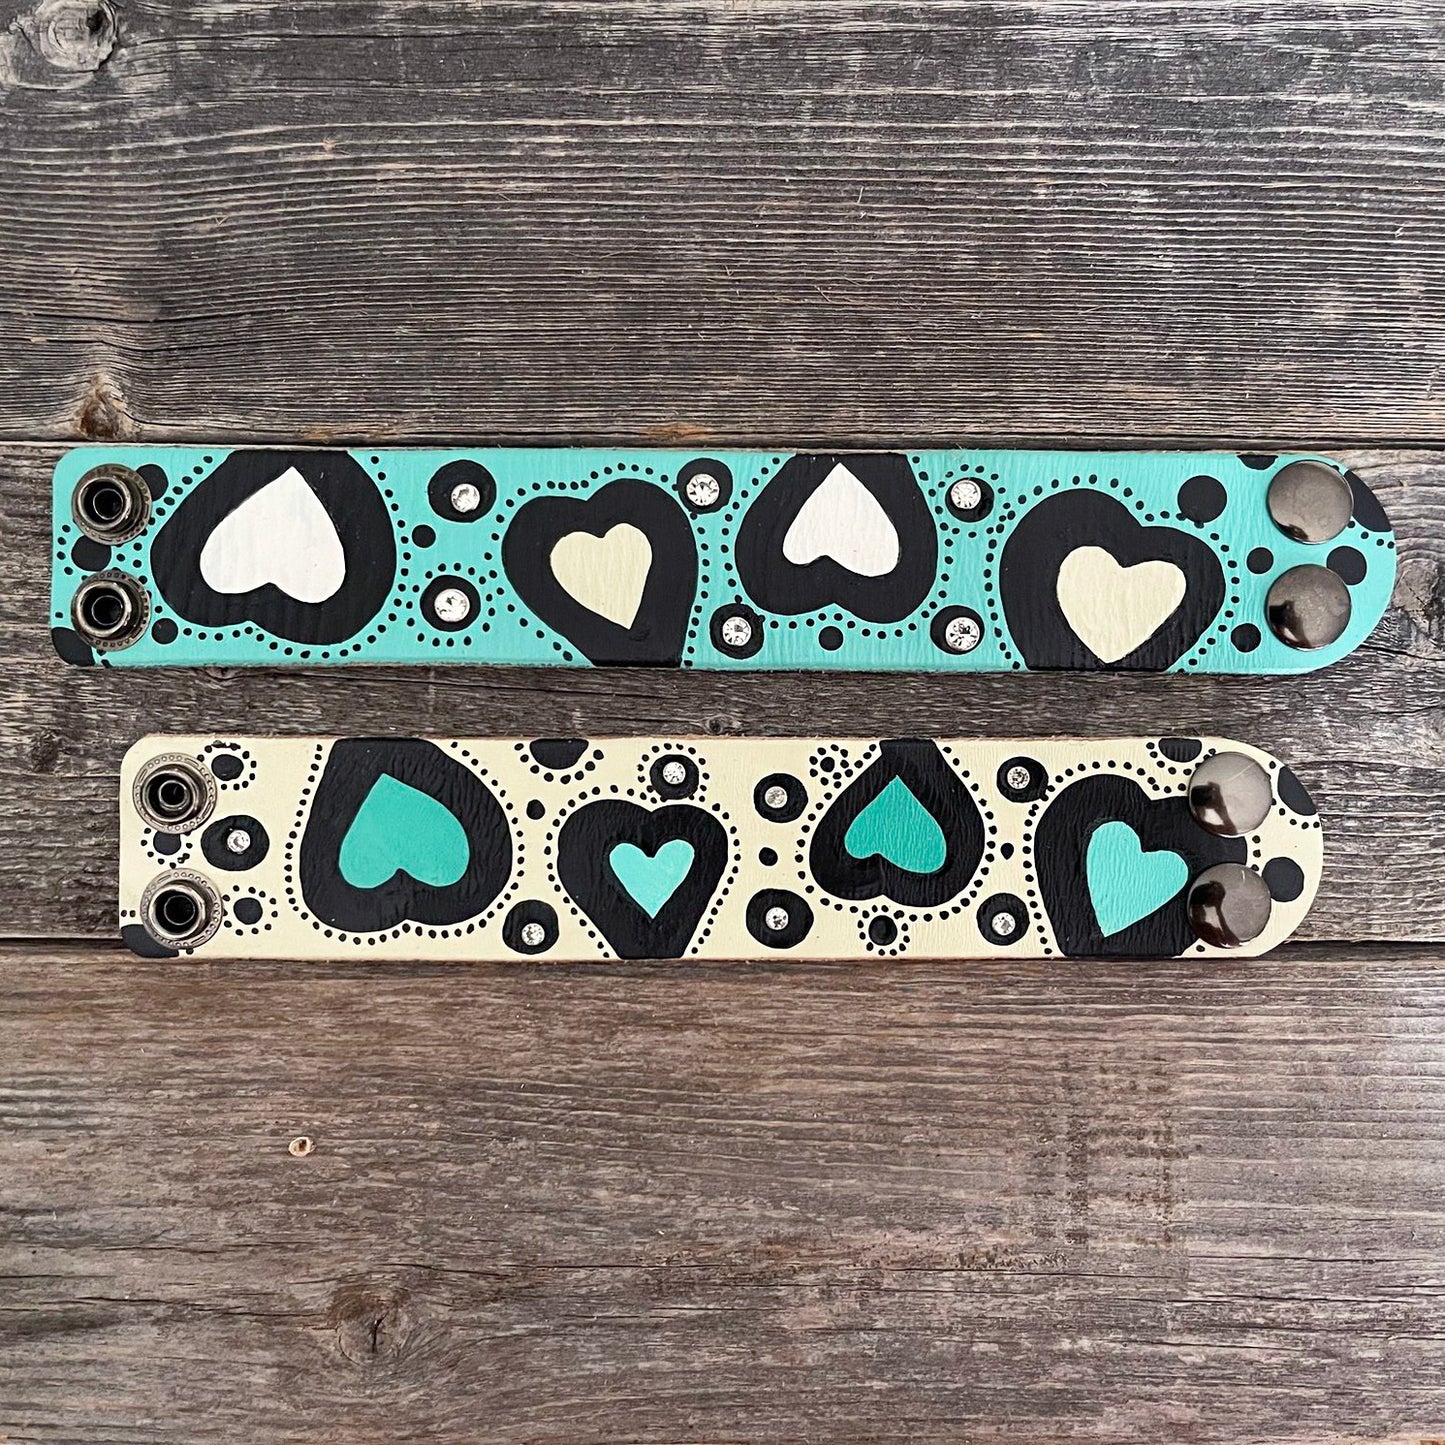 MADE TO ORDER - "Hearts" Hand-painted Leather Bracelet